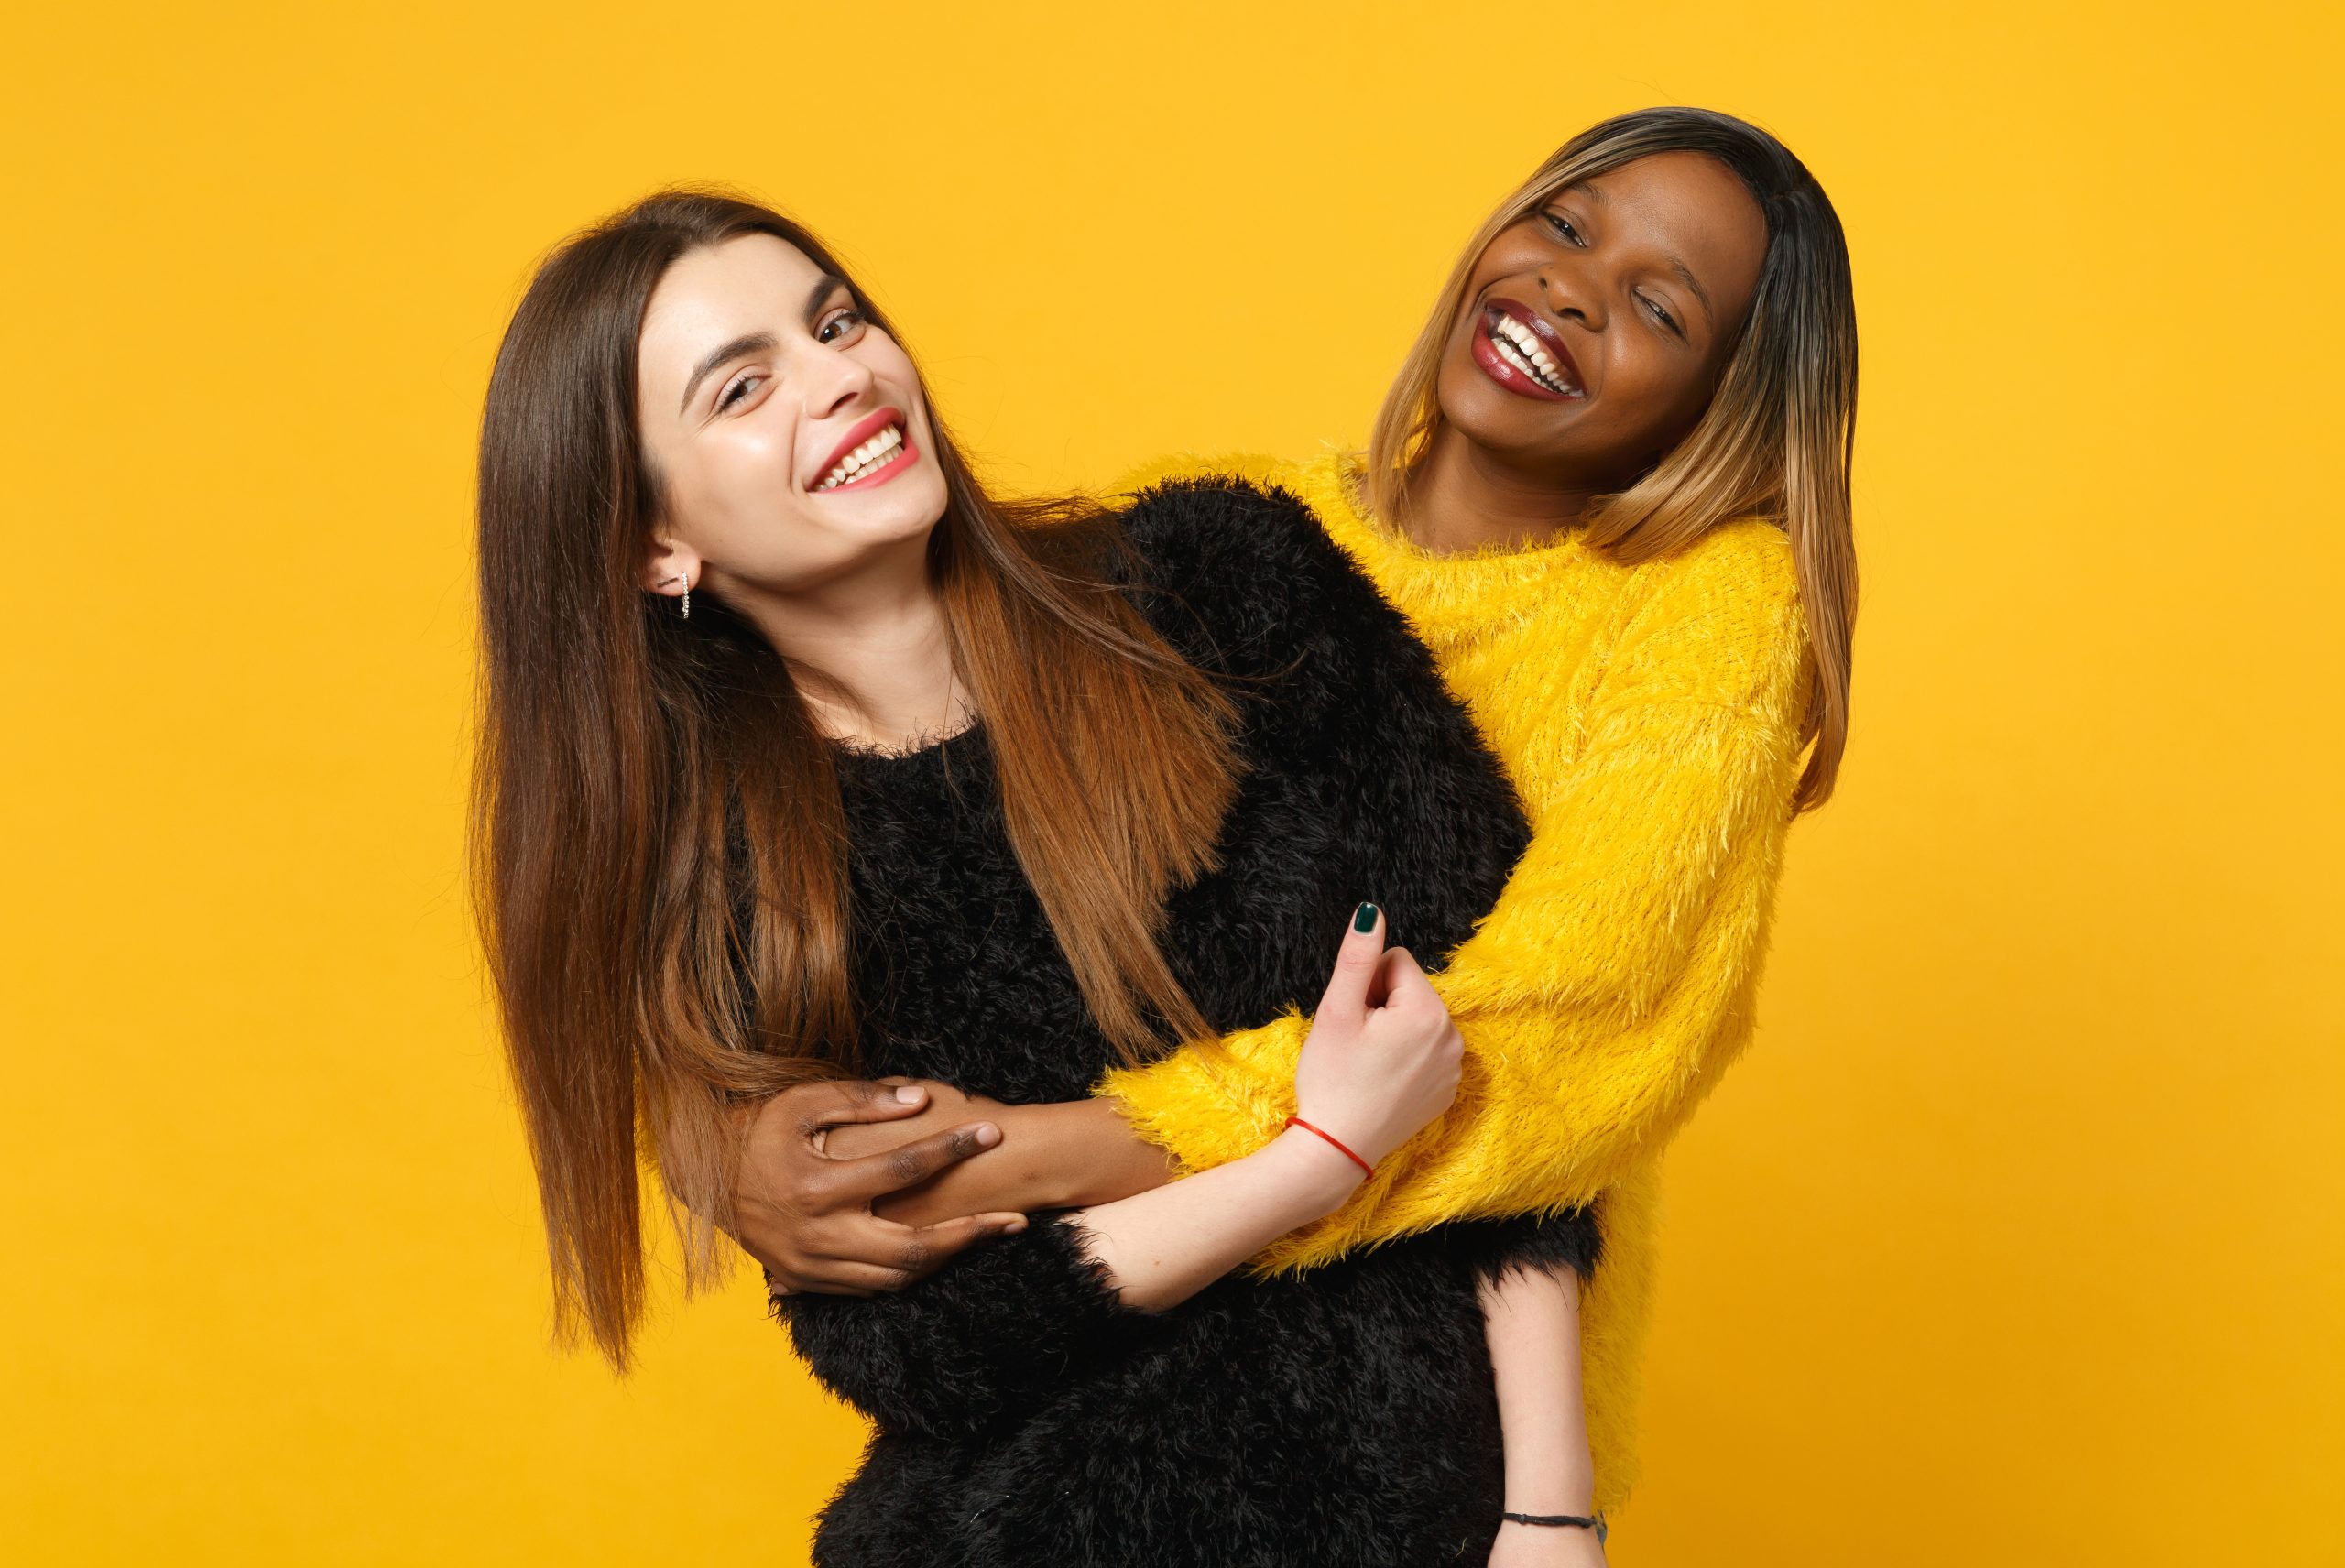 Two young women in black and yellow clothes hugging with a bright orange wall background